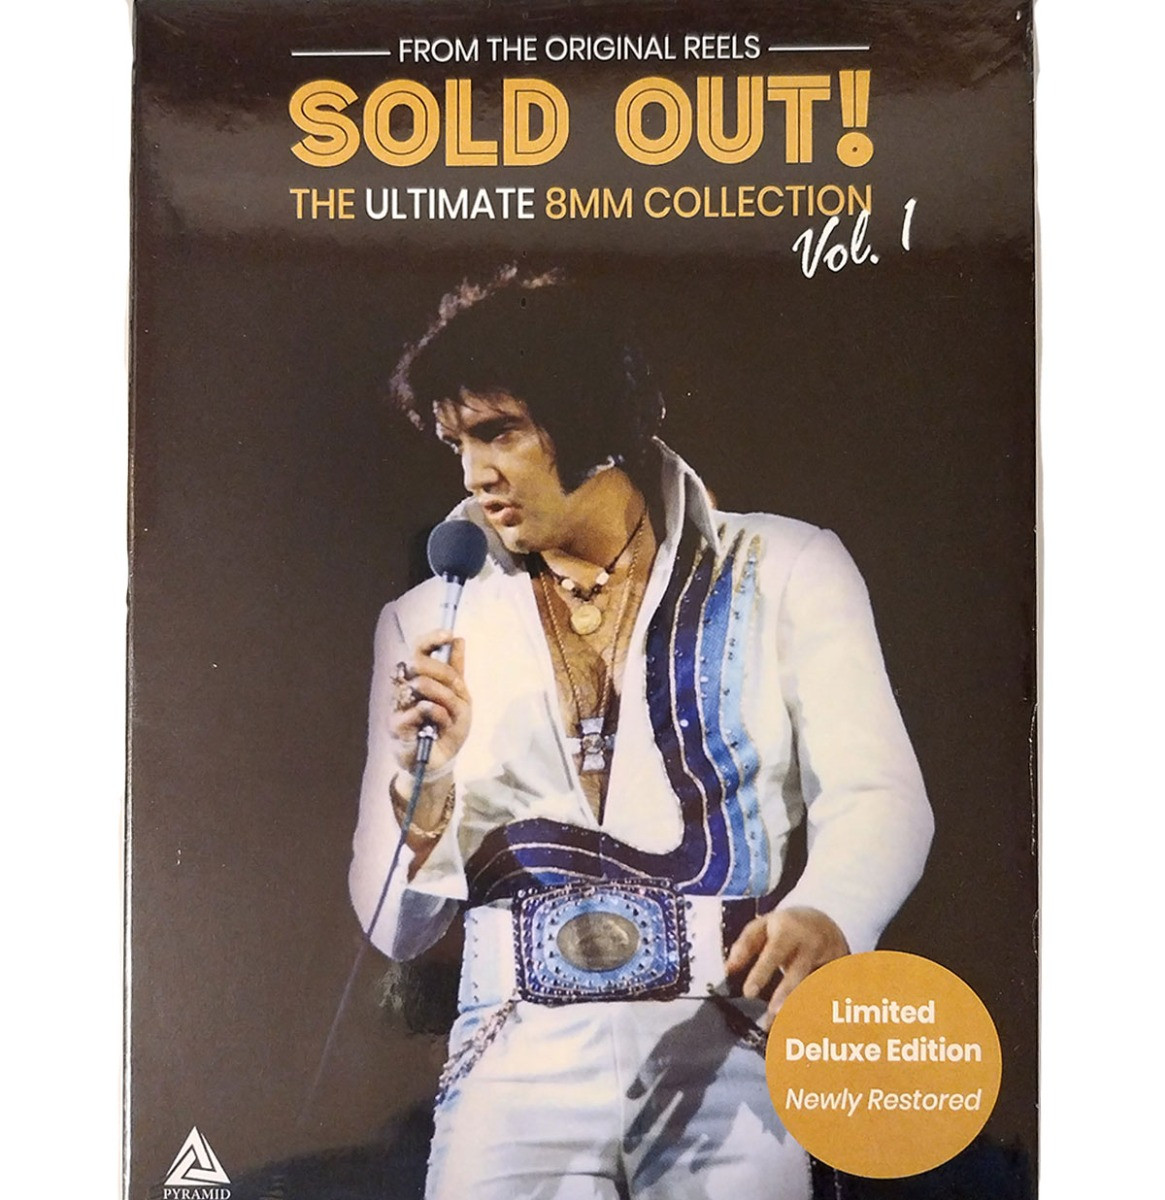 Elvis Presley - Sold Out! The Ultimate 8MM Collection Vol.1 2-DVD Set